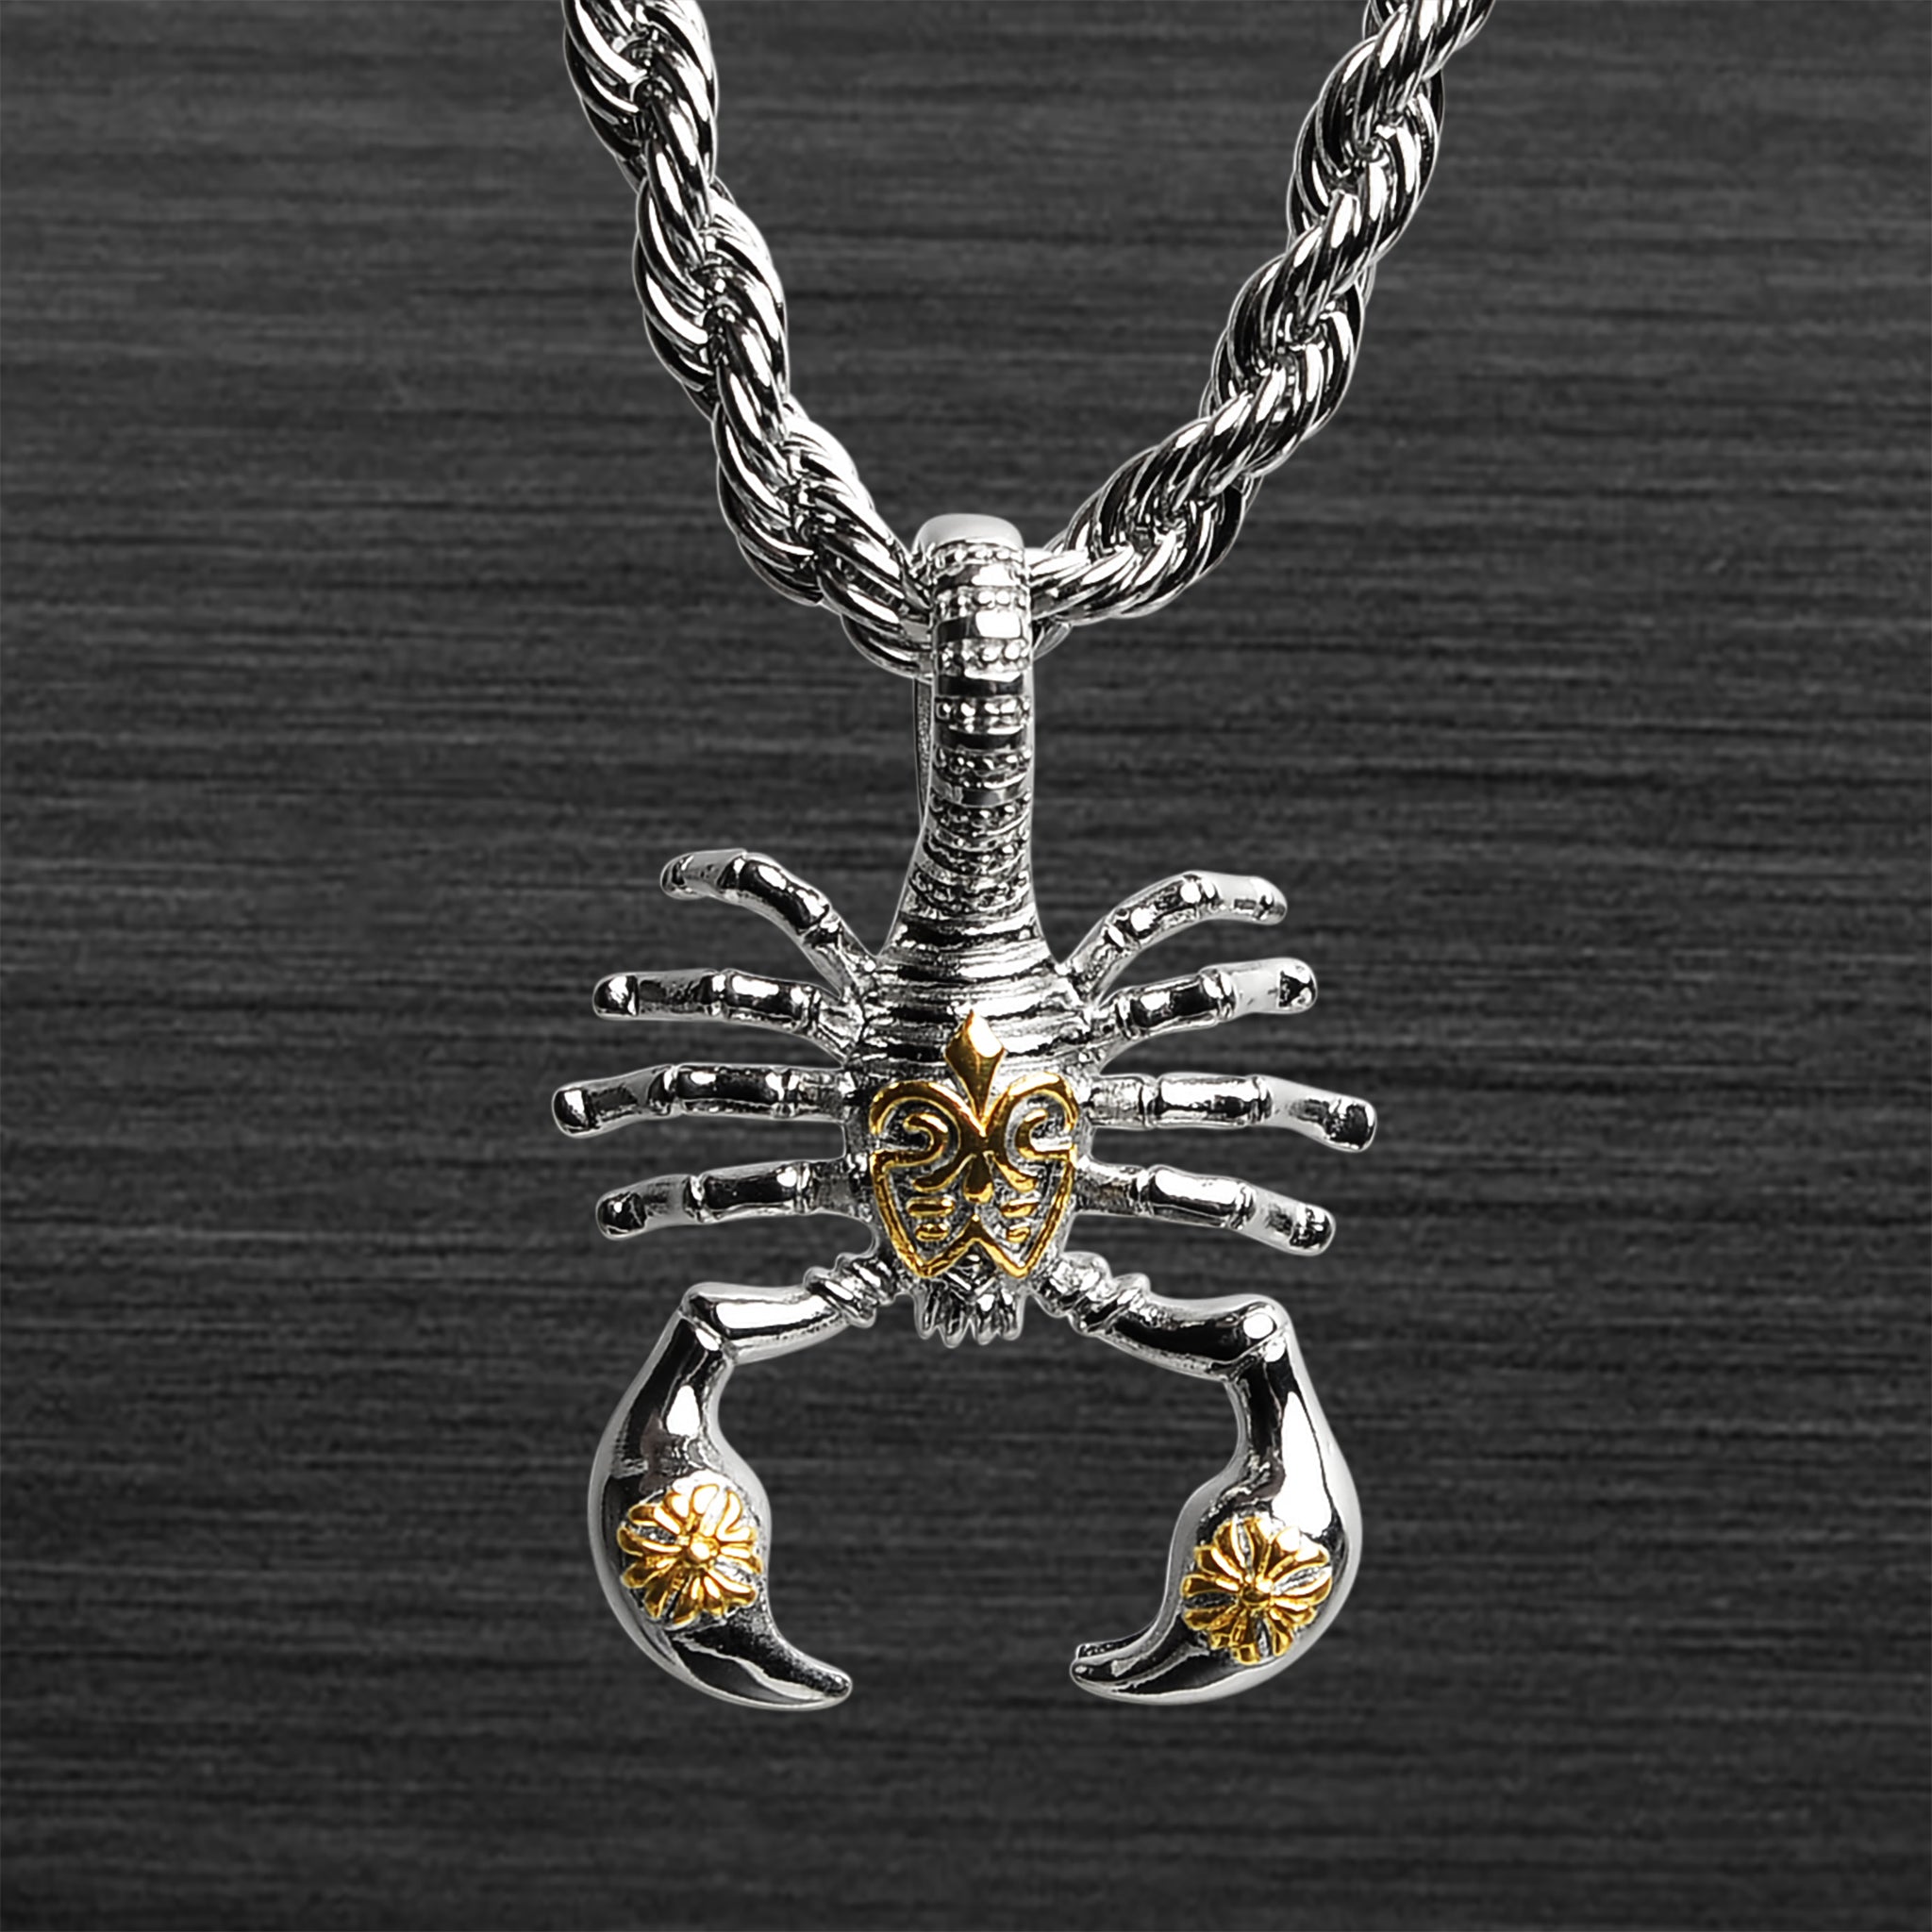 Stainless Steel With 18K GOLD Plated Accents Large Scorpion Rope Chain Necklace / PDJ5042-RTL